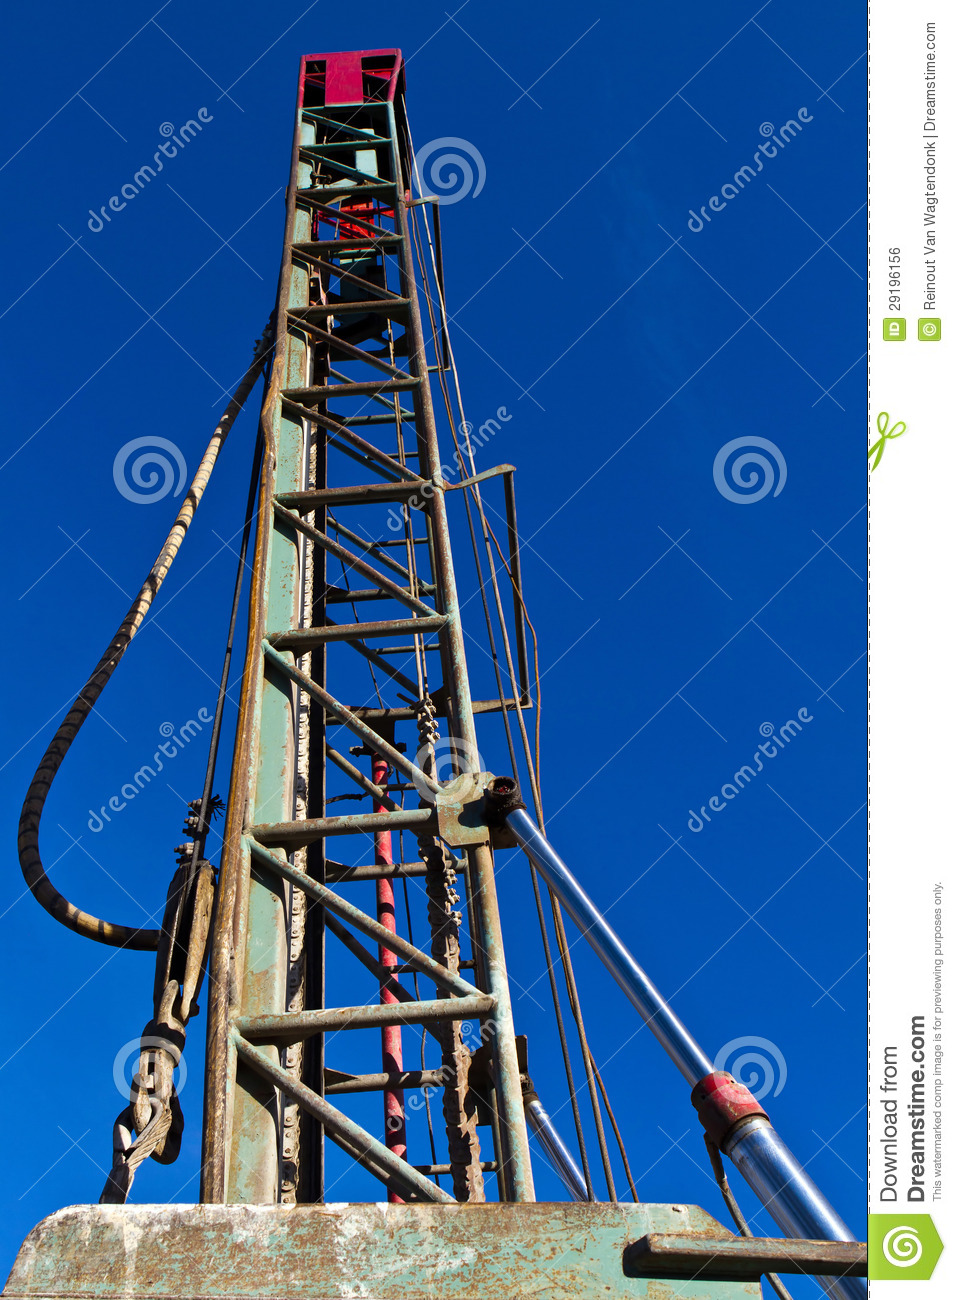 Water Well Drilling Tower Royalty Free Stock Image   Image  29196156